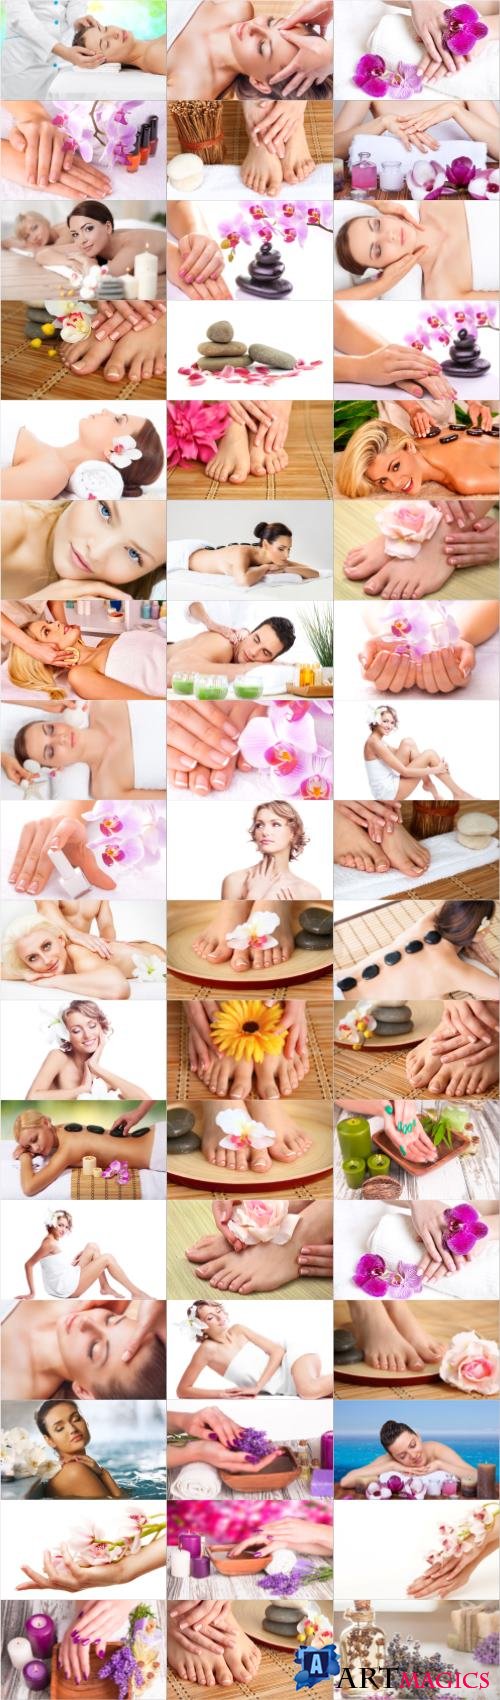 Girls in the spa salon large selection of stock photos